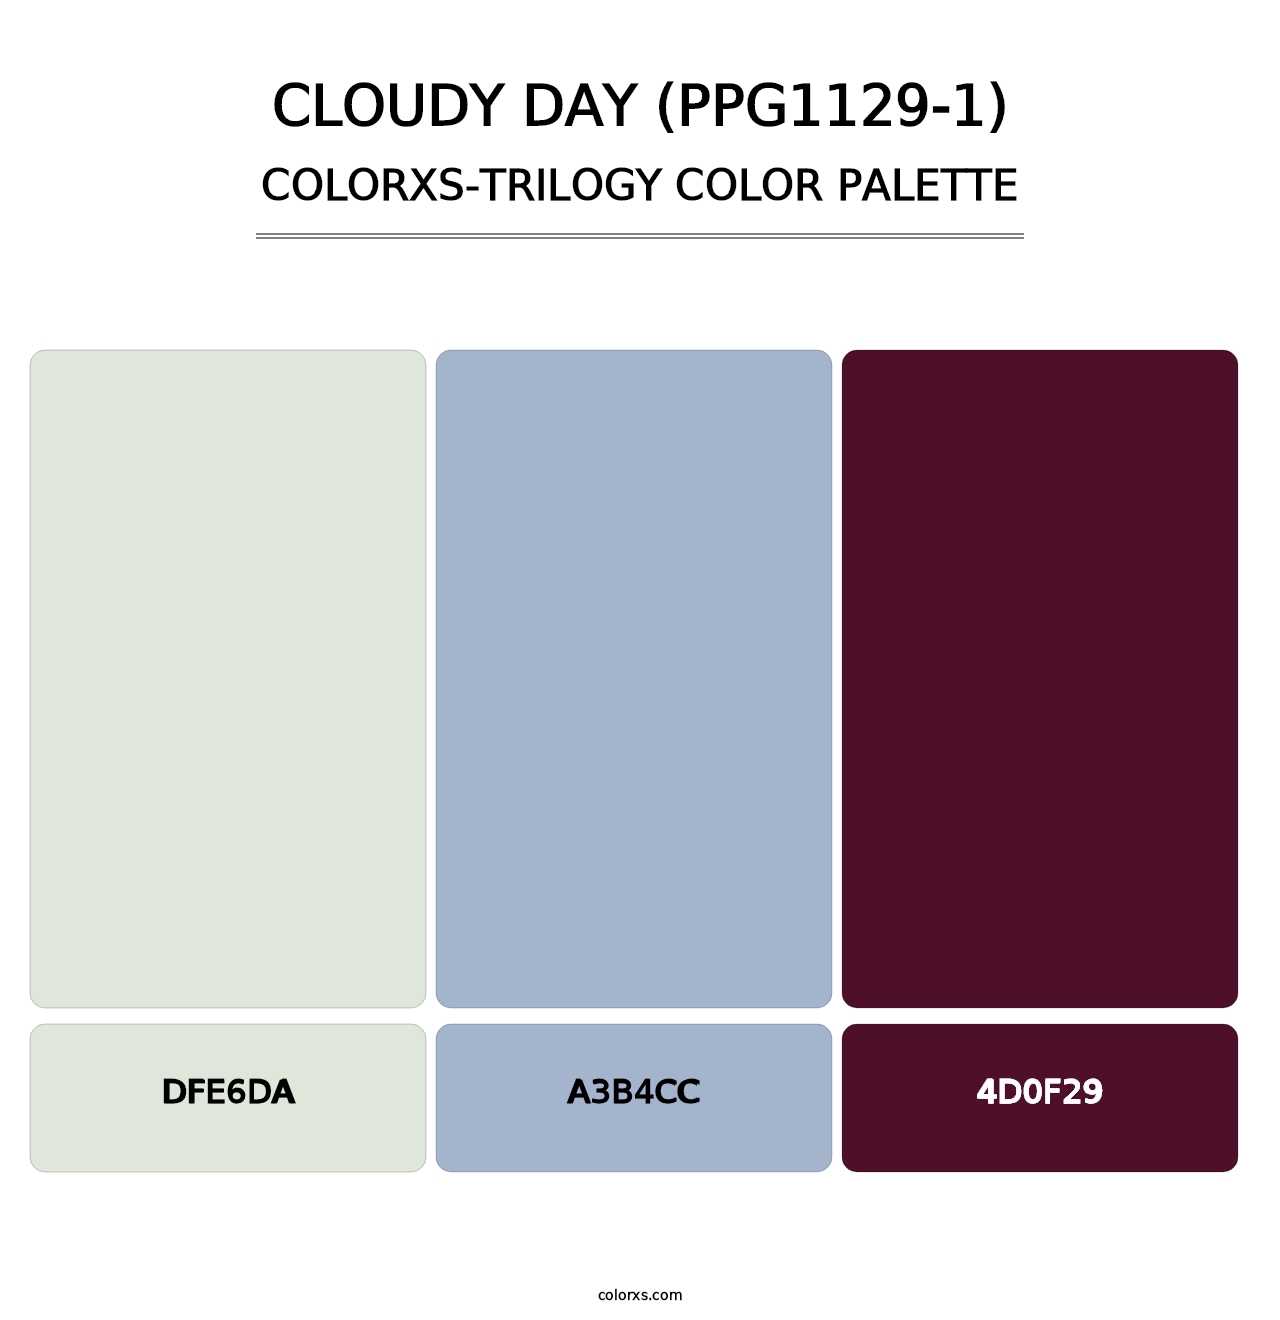 Cloudy Day (PPG1129-1) - Colorxs Trilogy Palette